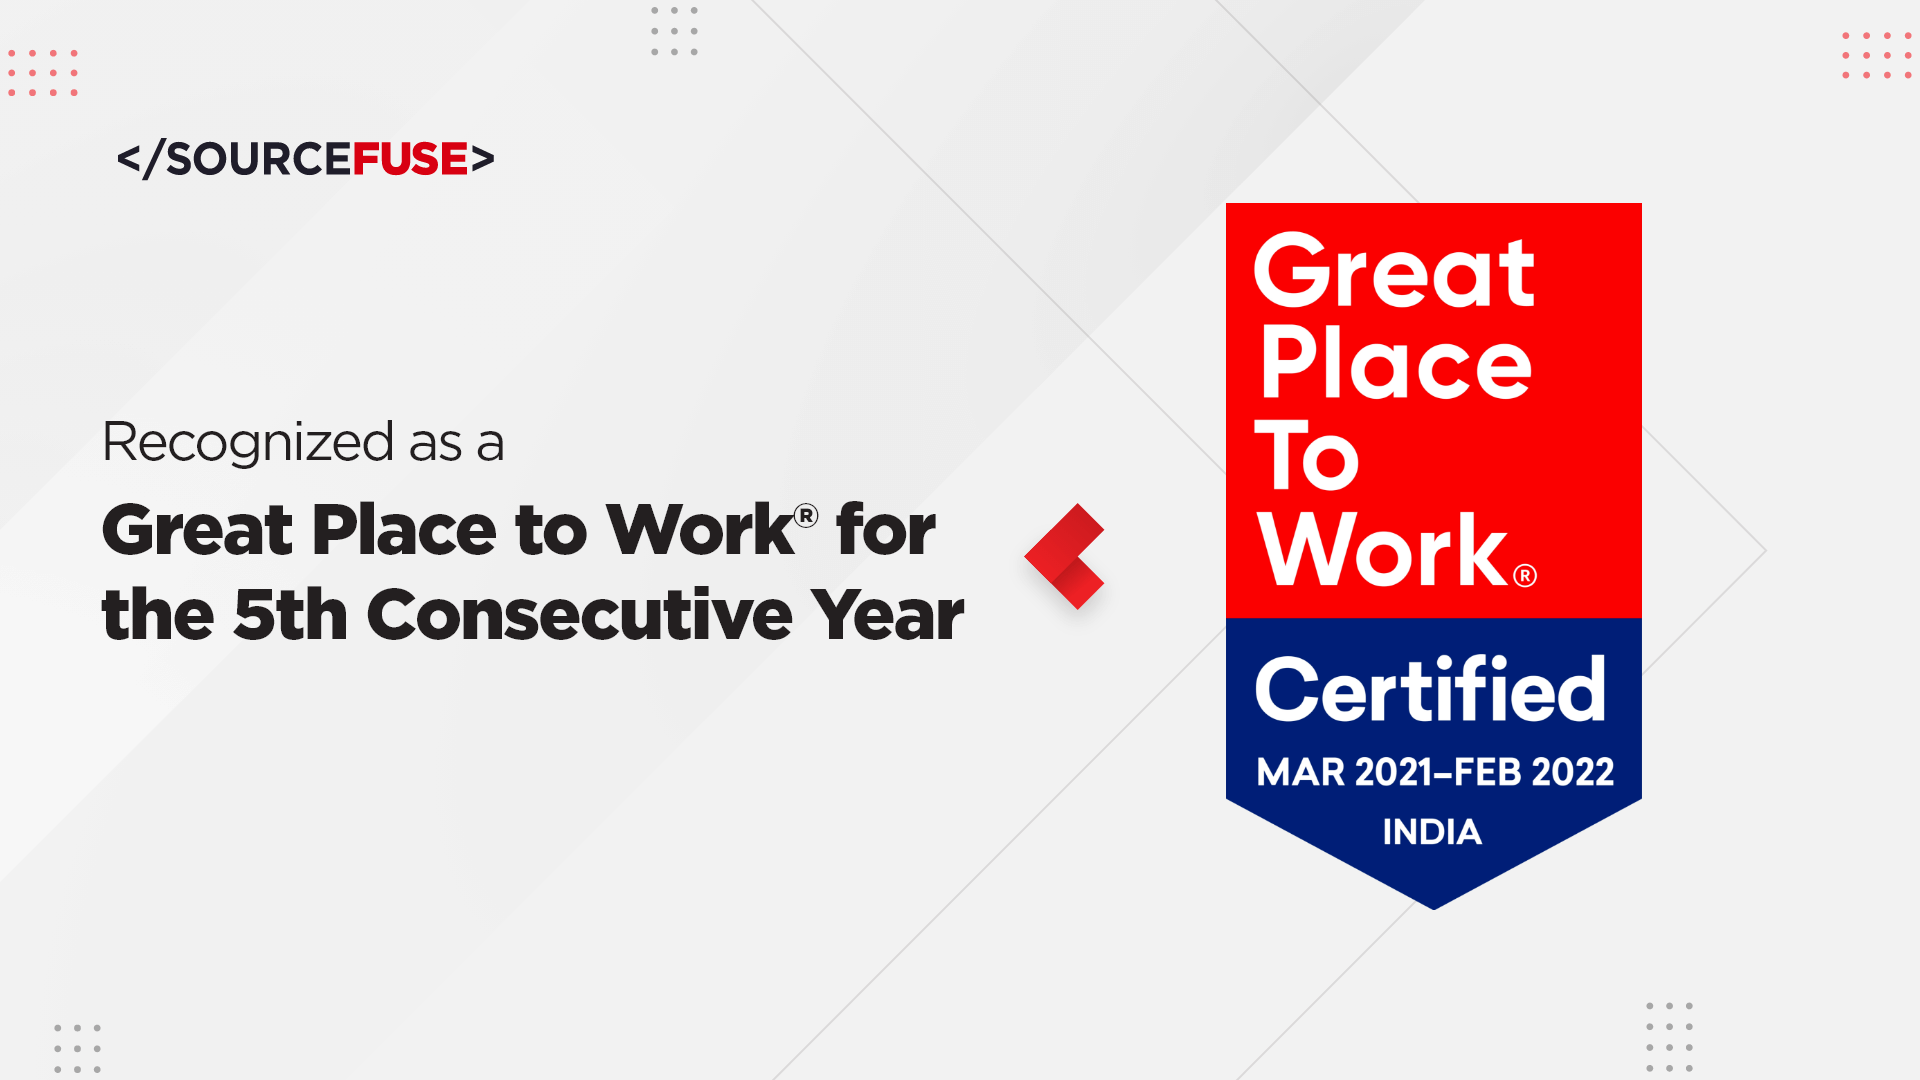 SourceFuse recognized as a Great Place to Work® for the 5th Consecutive Year